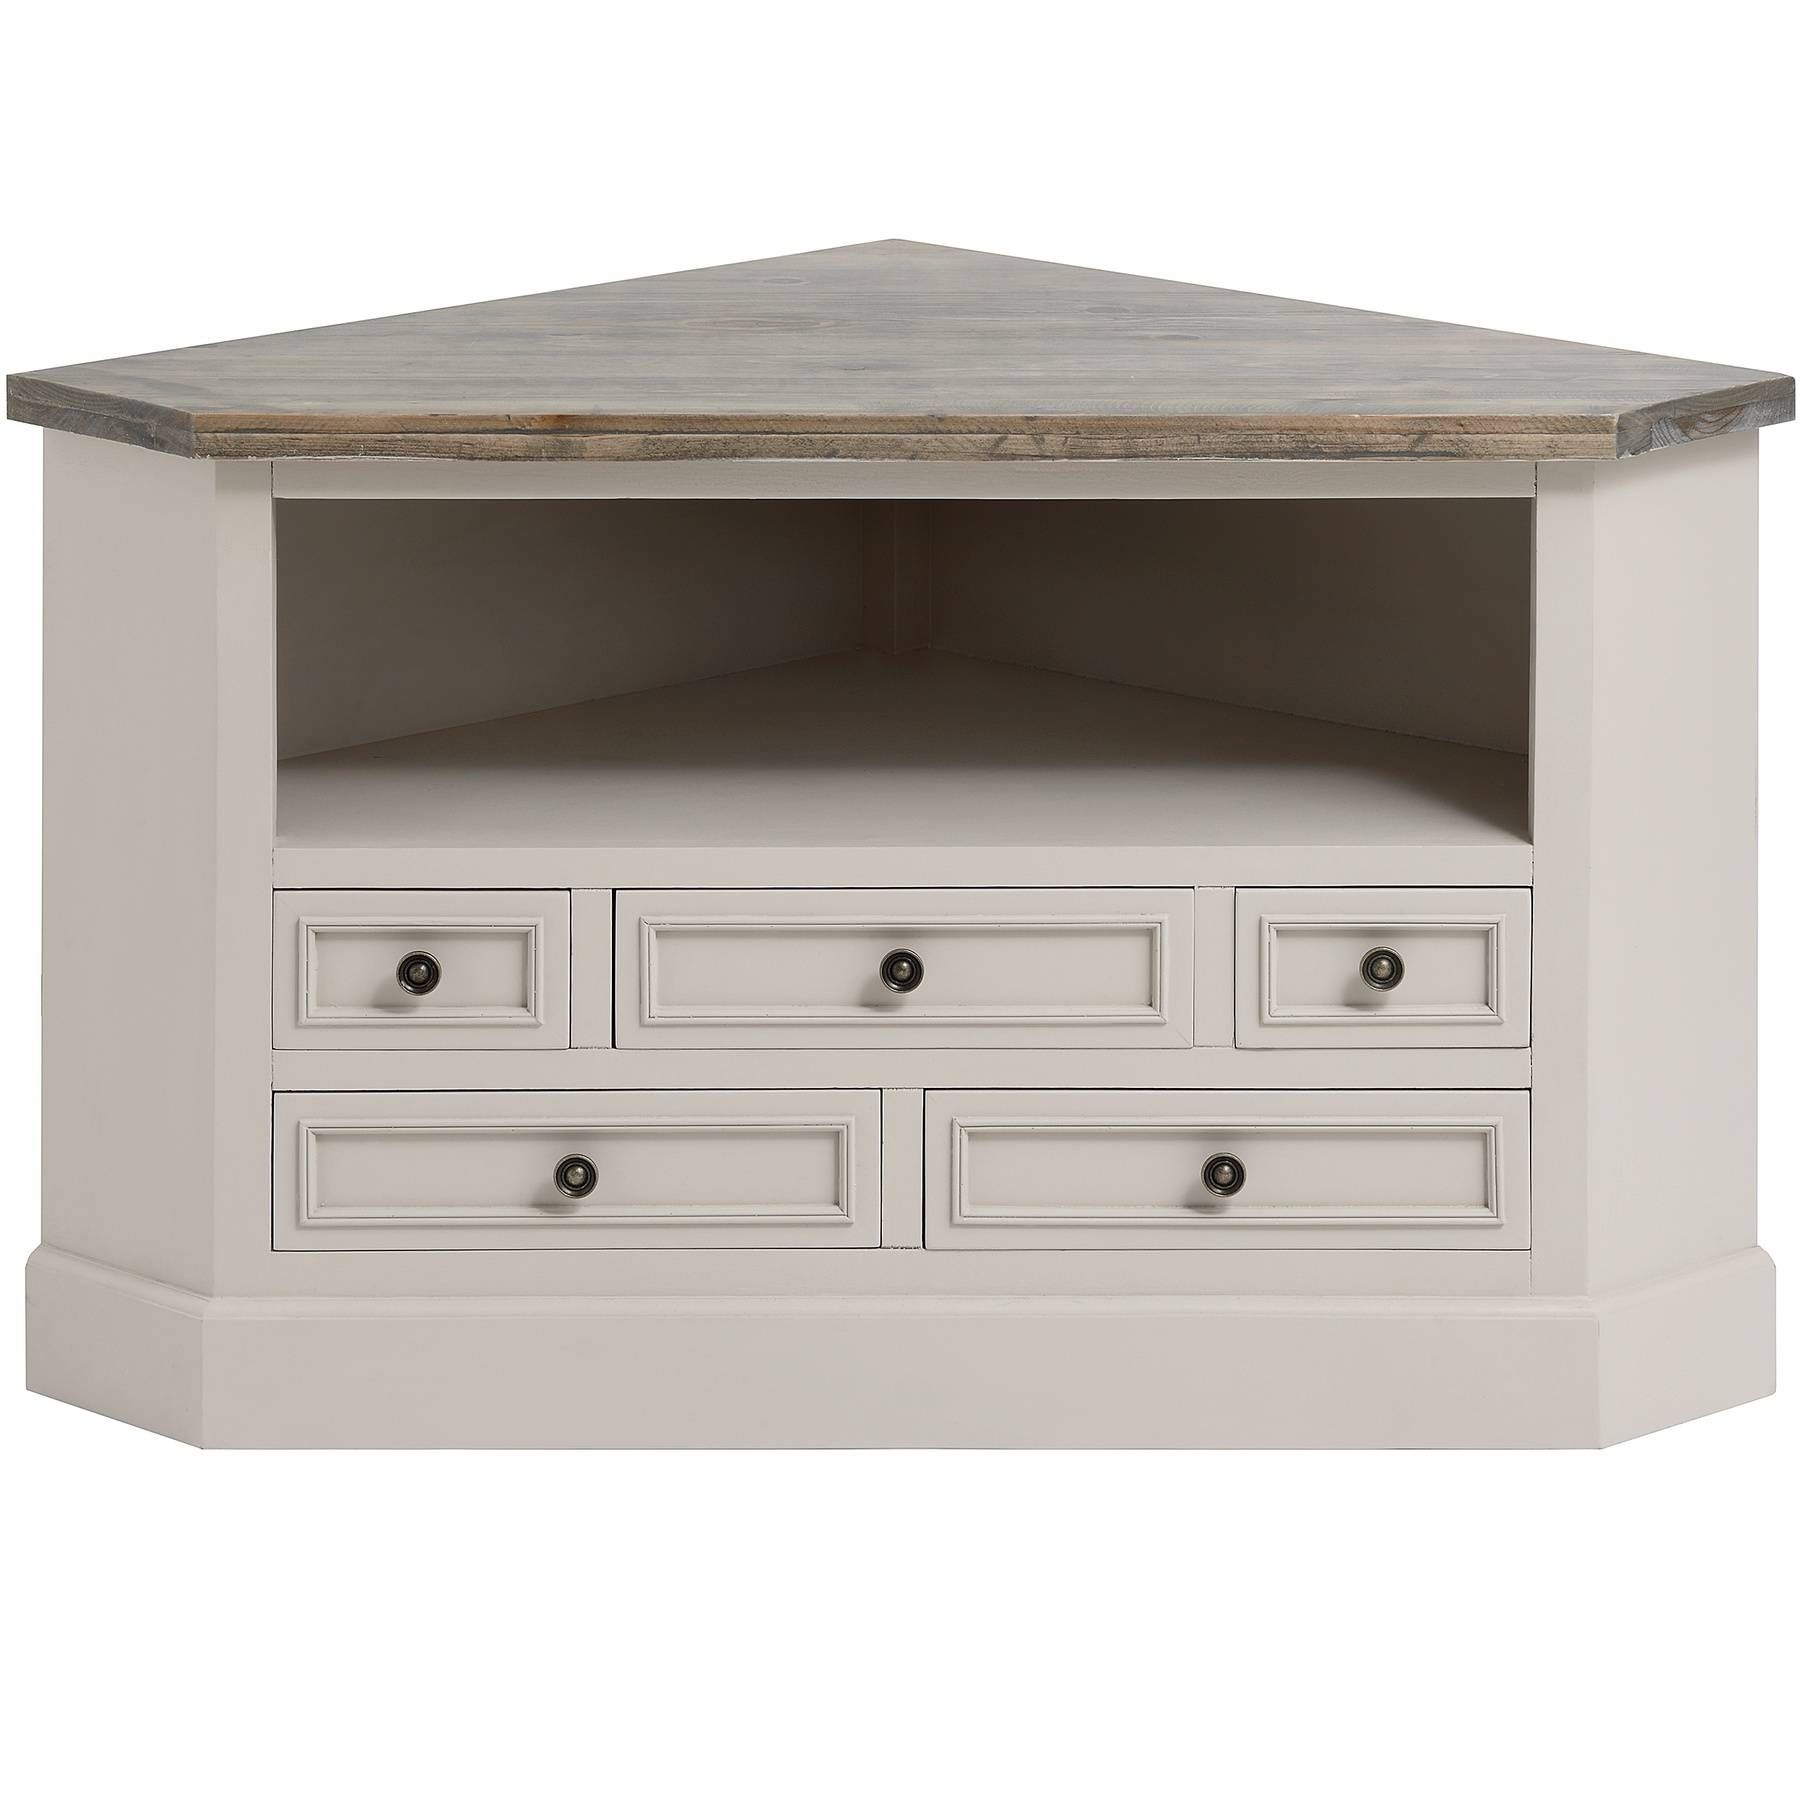 Rustic White Painted Walnut Wood Corner Tv Stand With Drawers Of Pertaining To Rustic White Tv Stands (View 8 of 15)